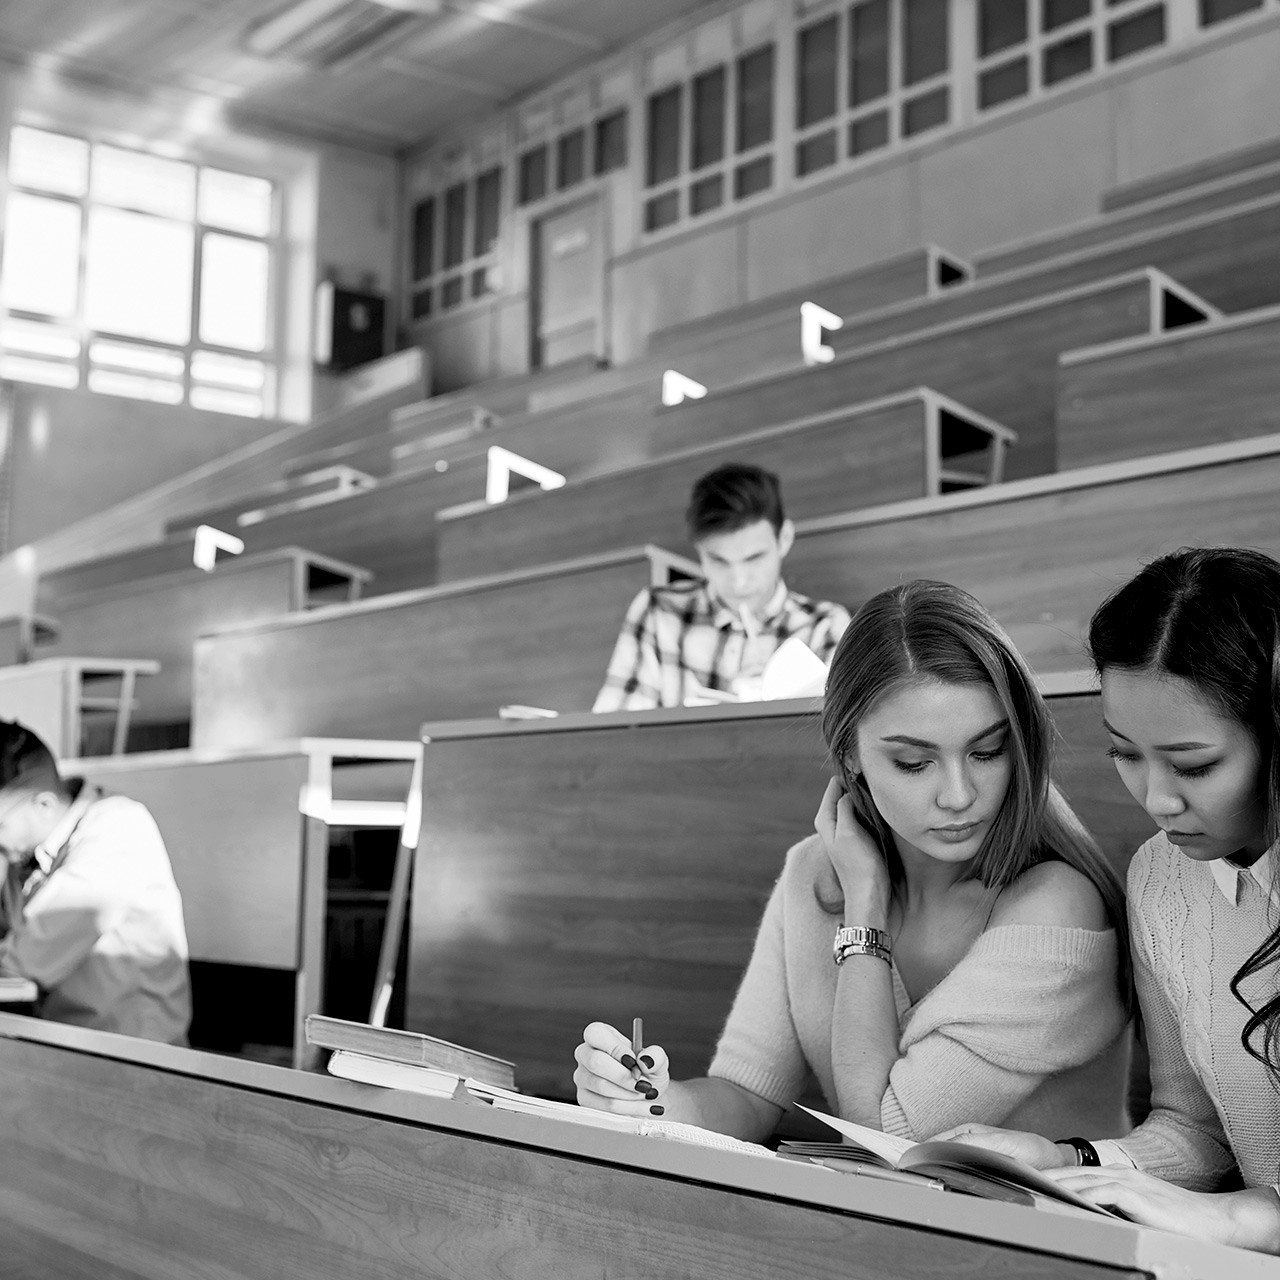 Two women sitting close together in a lecture hall sharing a book